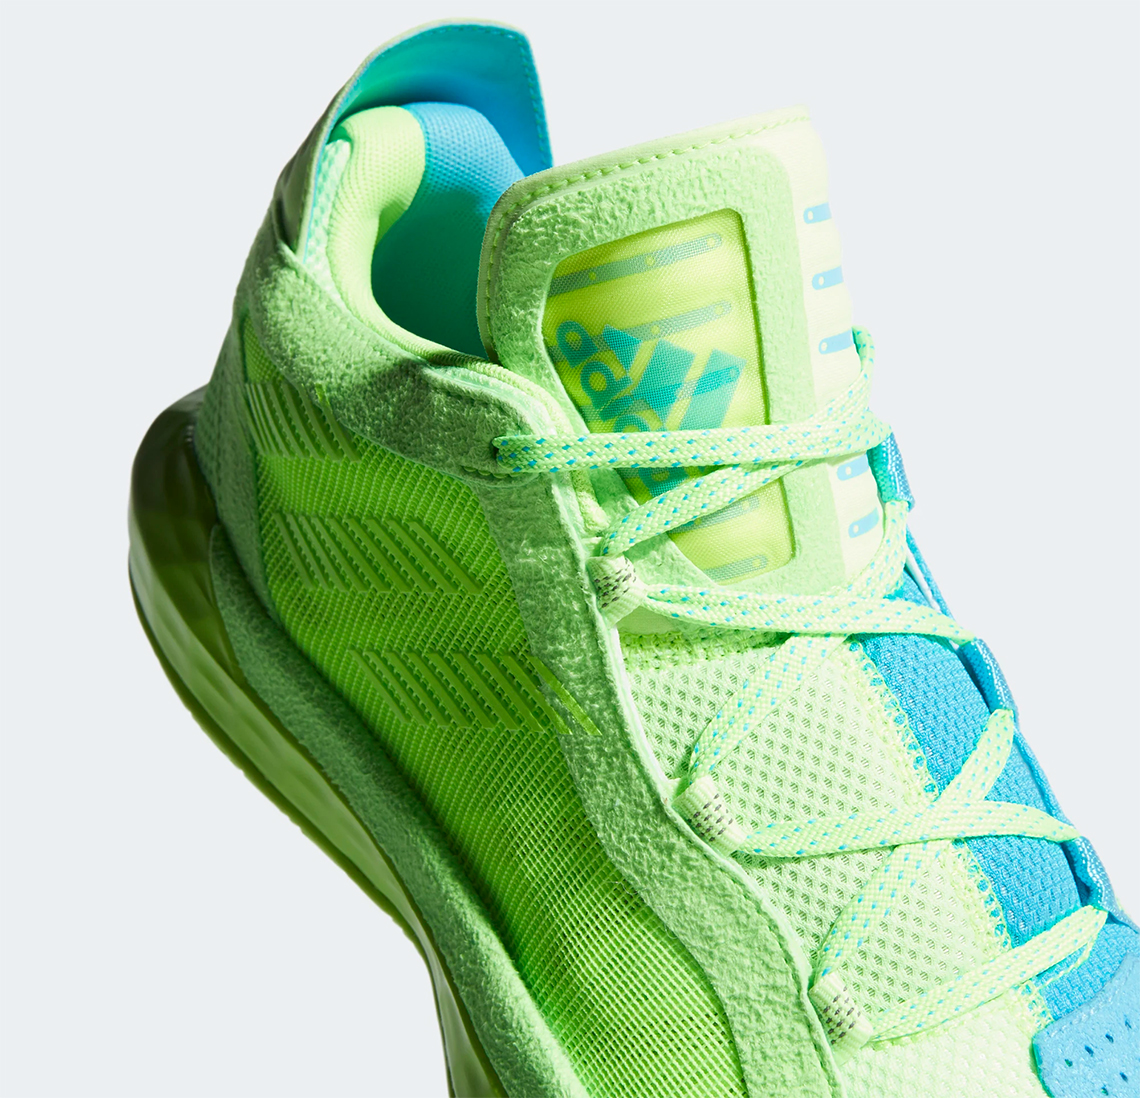 adidas dame 6 green and blue